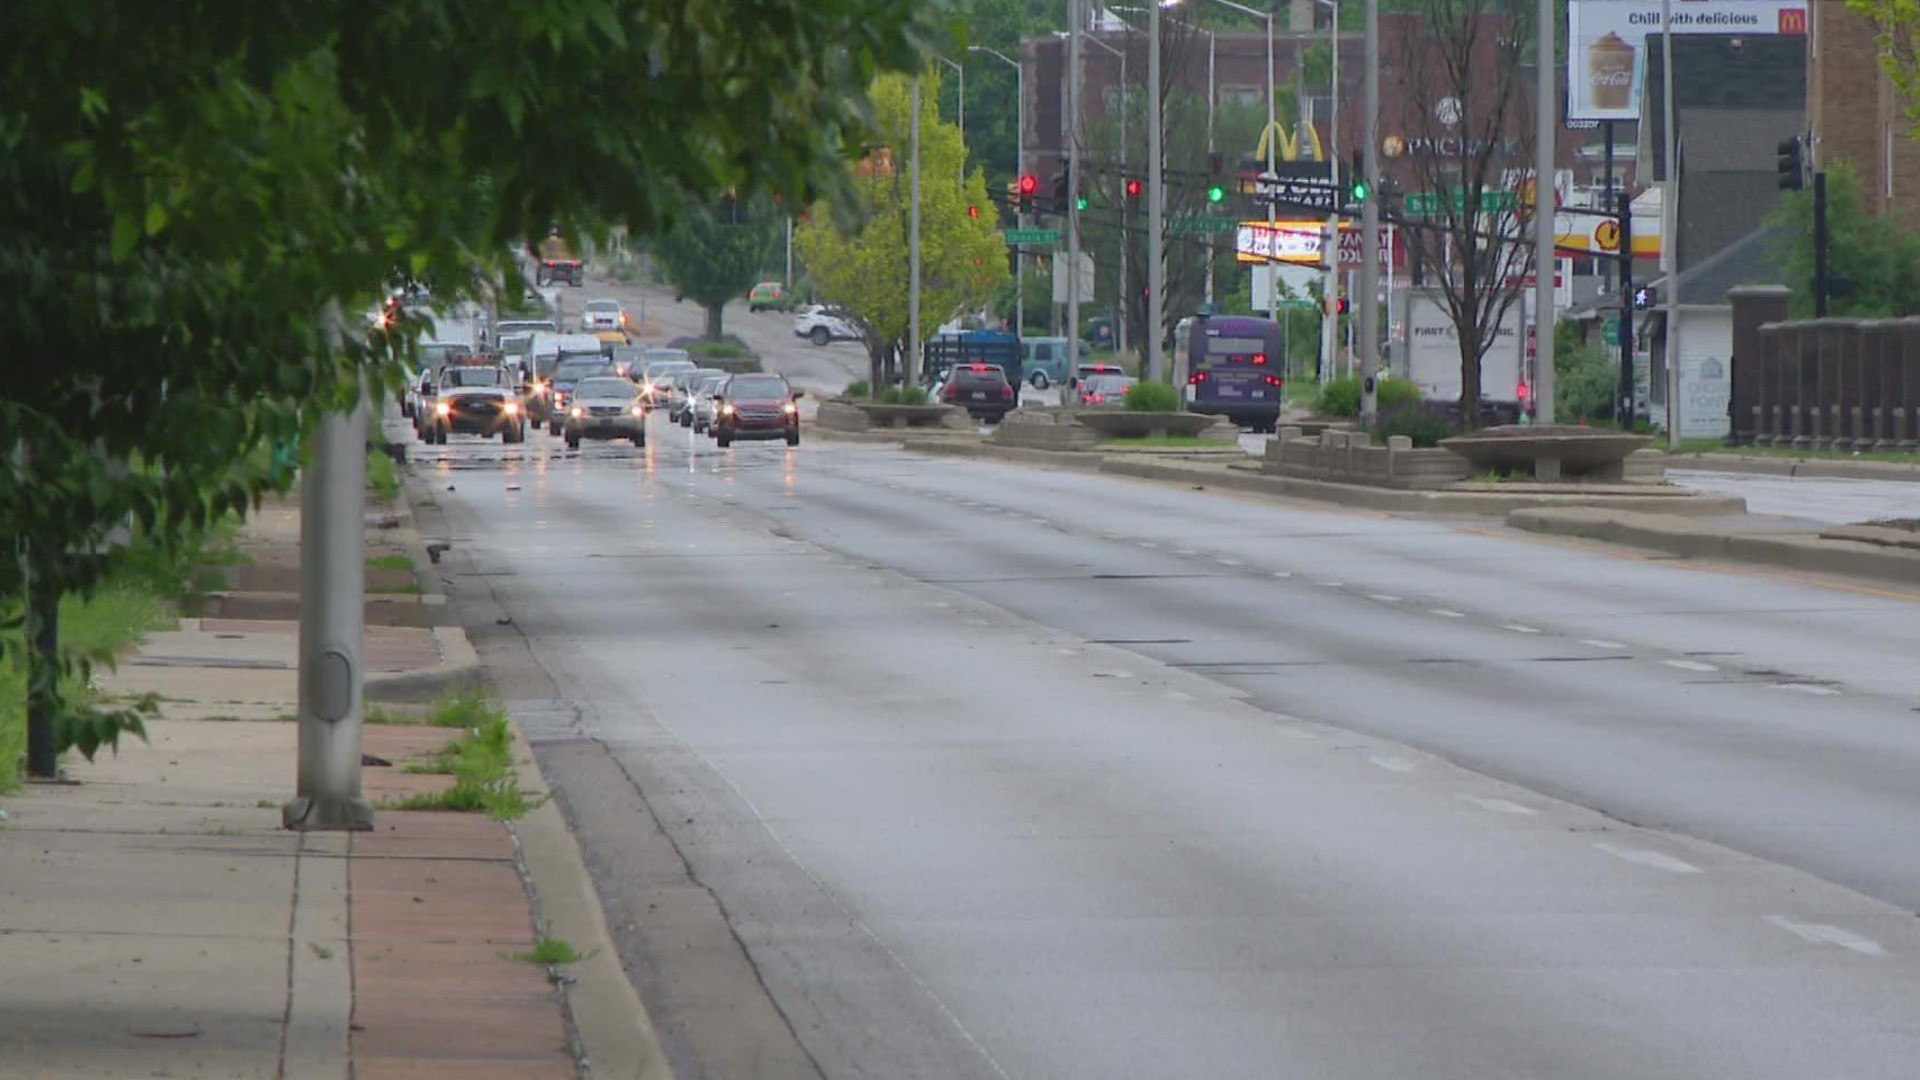 13 Investigates found neighbors in one part of Indianapolis are worried about drag racing that's taking place along 38th Street.